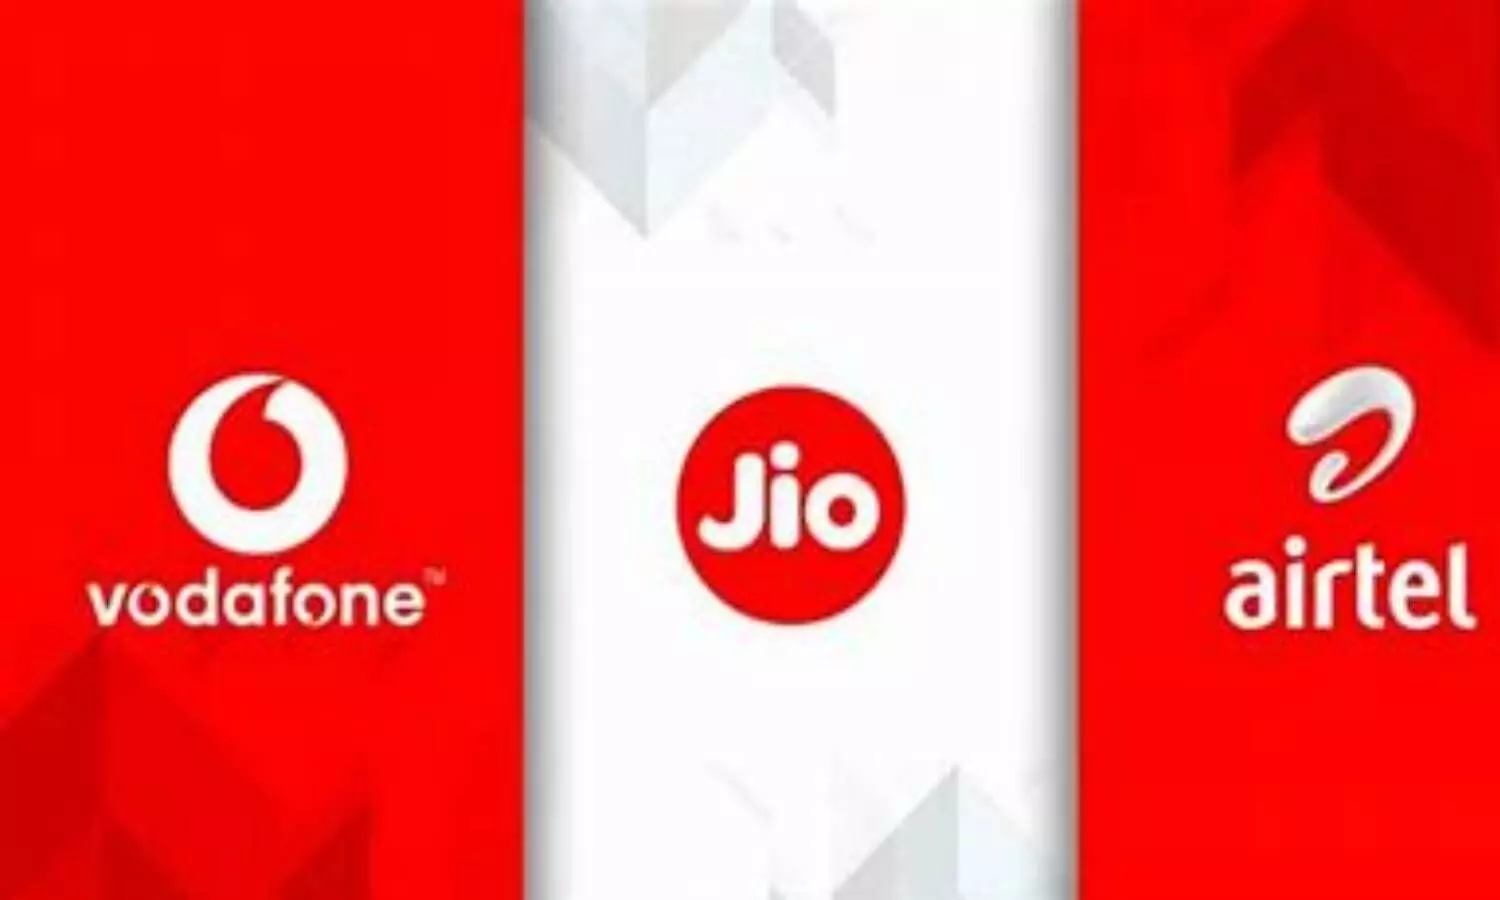 Vodafone, Jio, Airtel plans that offer free subscription to Prime plans to hike prices